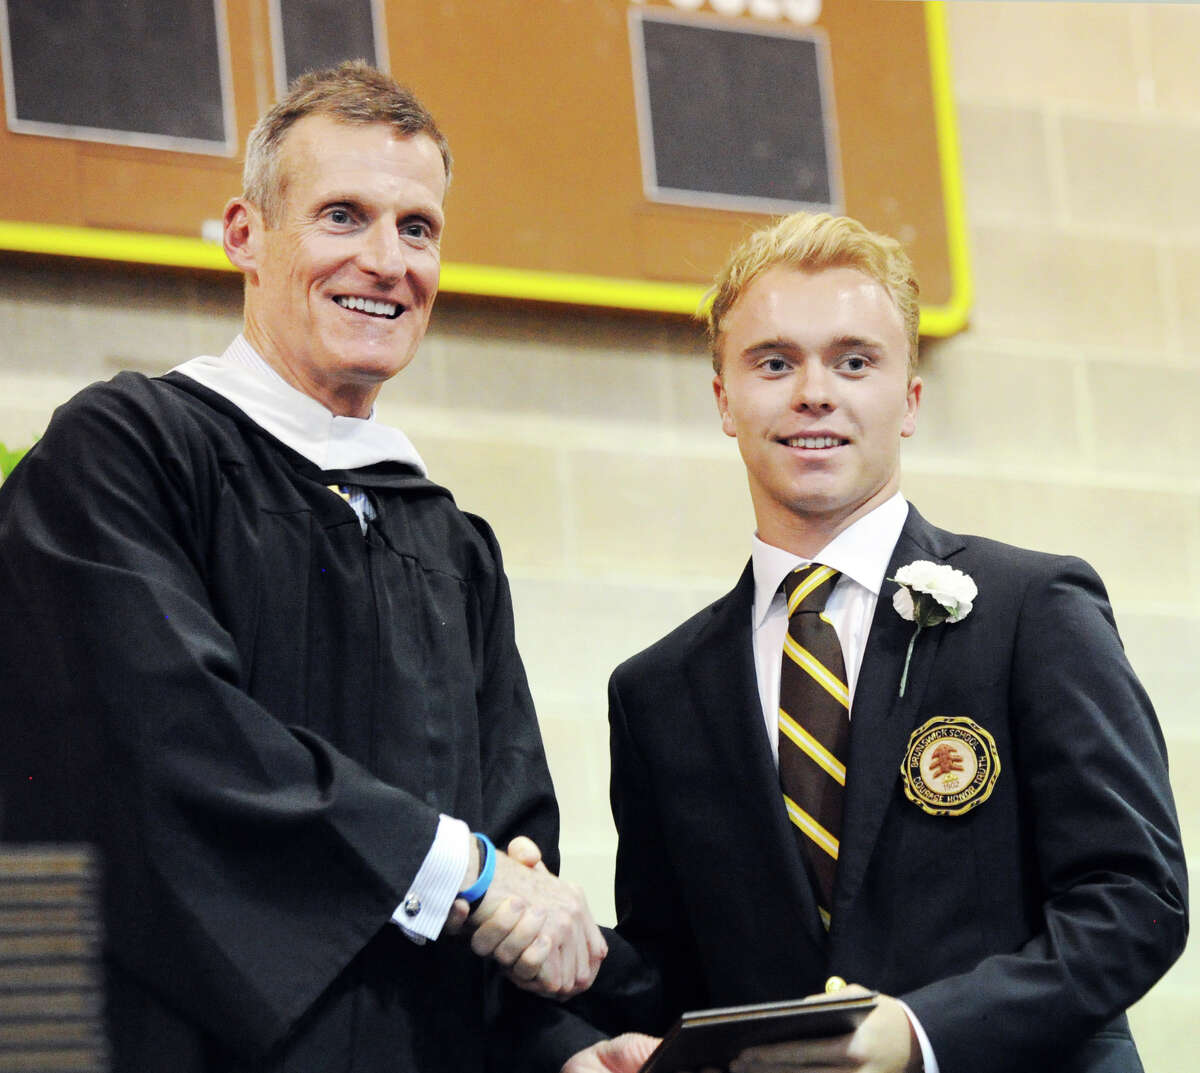 Brunswick School Headmaster Tom Philip, left, shakes hands with Charlie Berger, after handing Berger his diploma during the Brunswick School commencement in the Dann Gymnasium at the school in Greenwich, Conn., Wednesday, May 23, 2018. Berger said he will be attending Southern Methodist University in the fall and was one of Ninety-nine students that graduated from Brunswick.